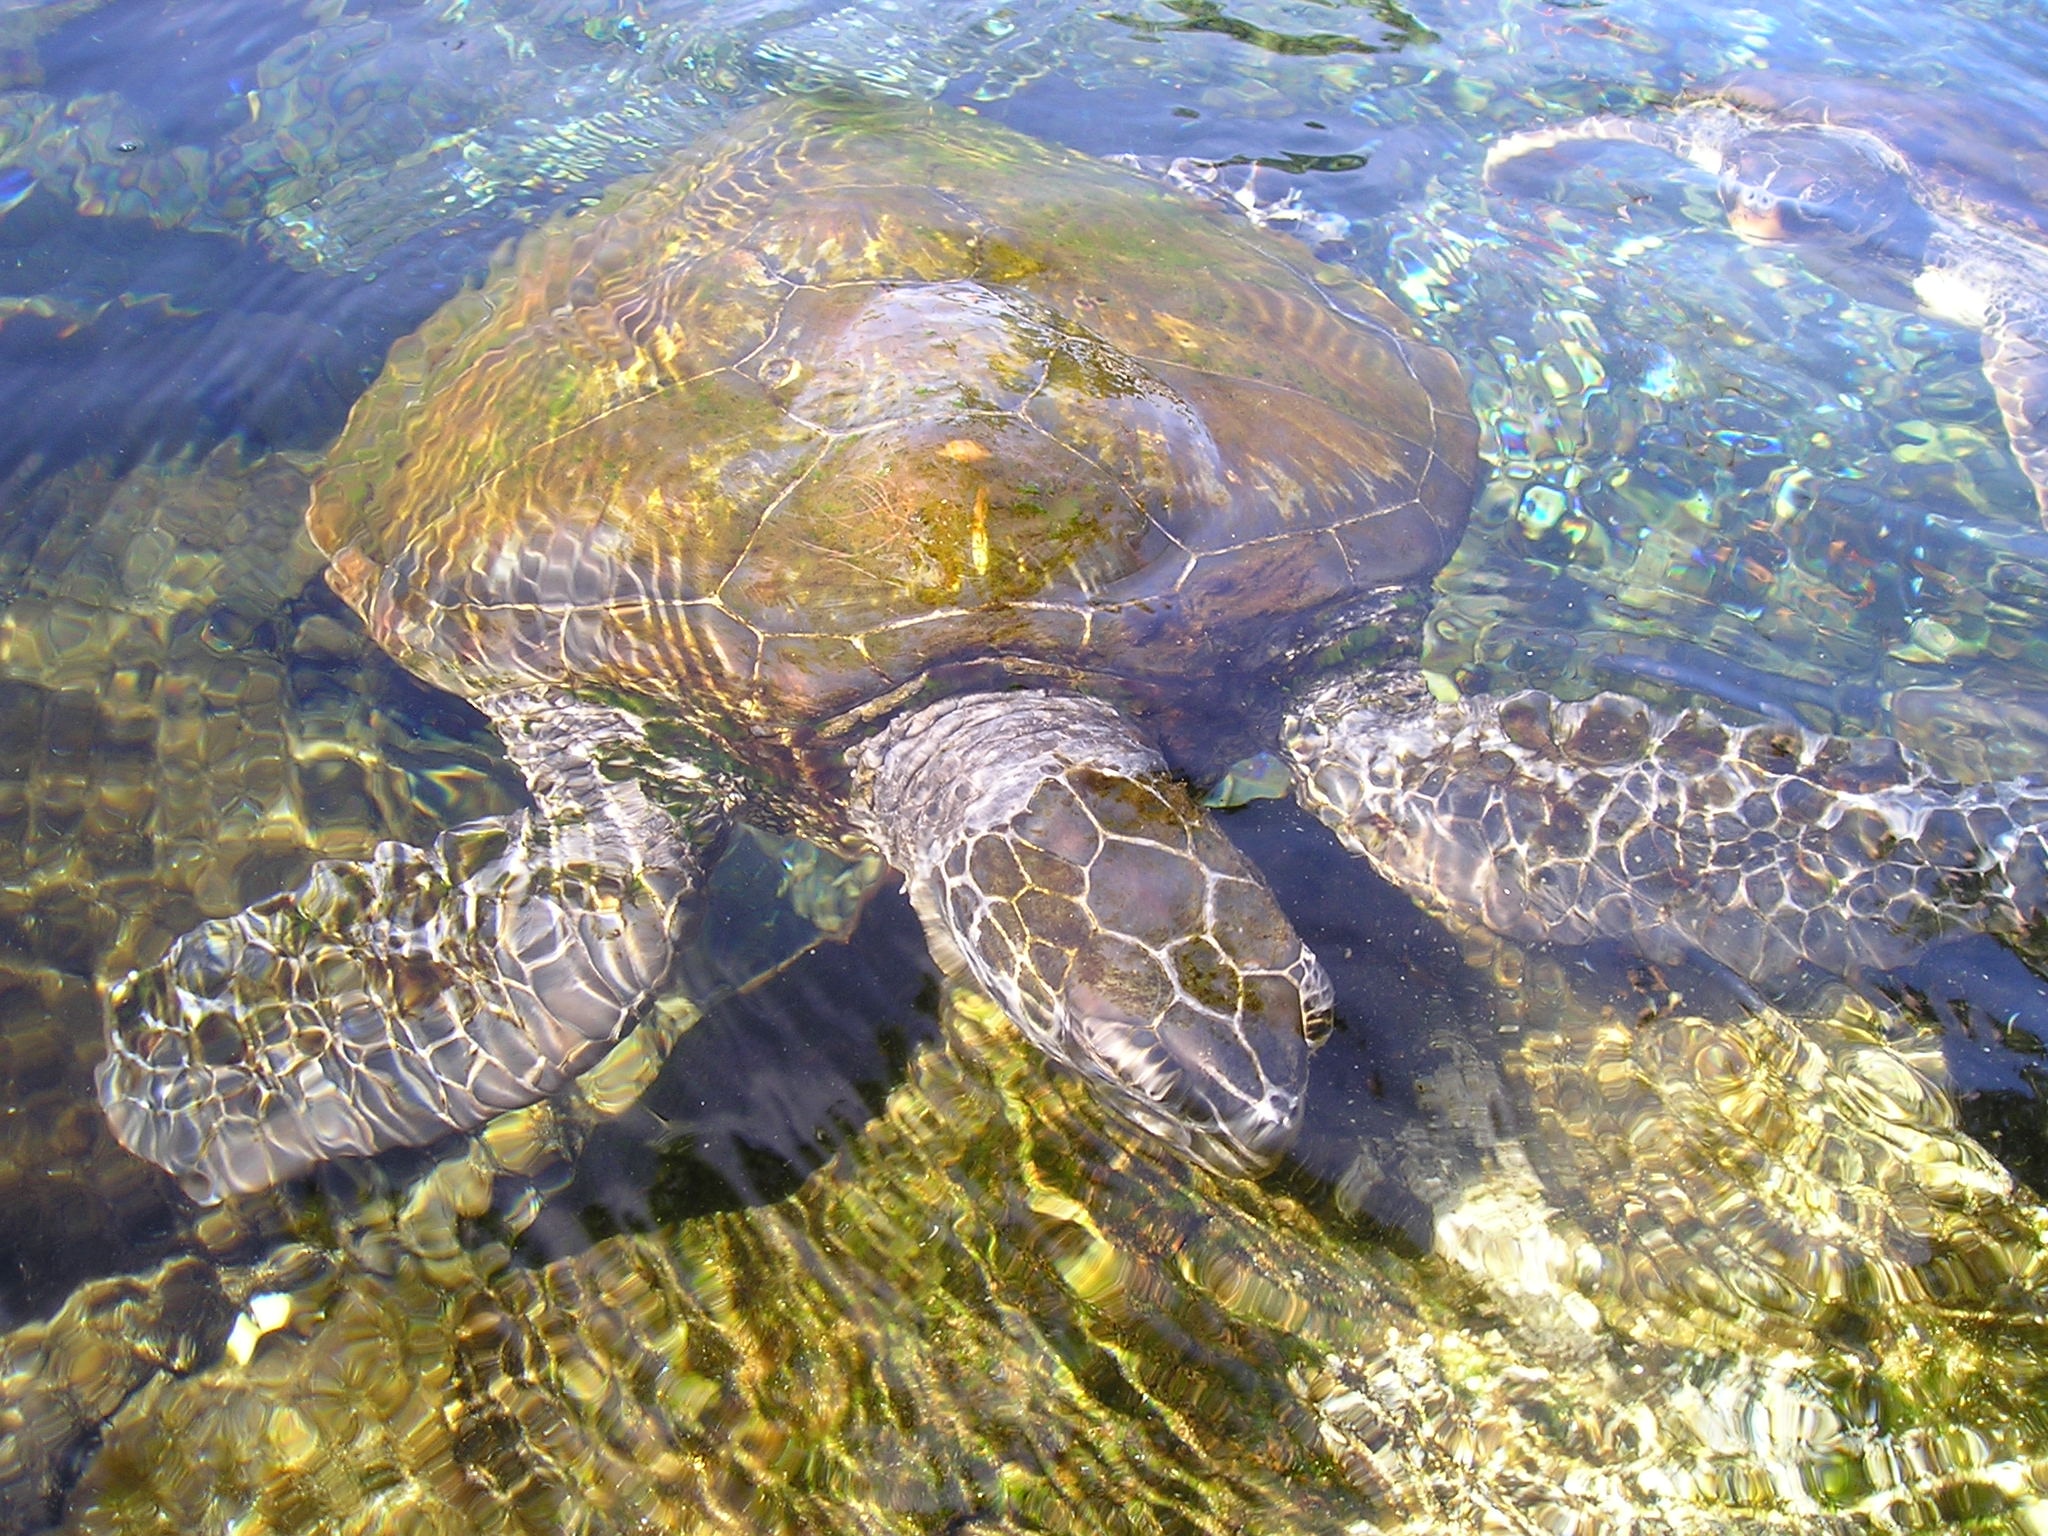 Turtle, Water Creature, Animal, one animal, animals in the wild